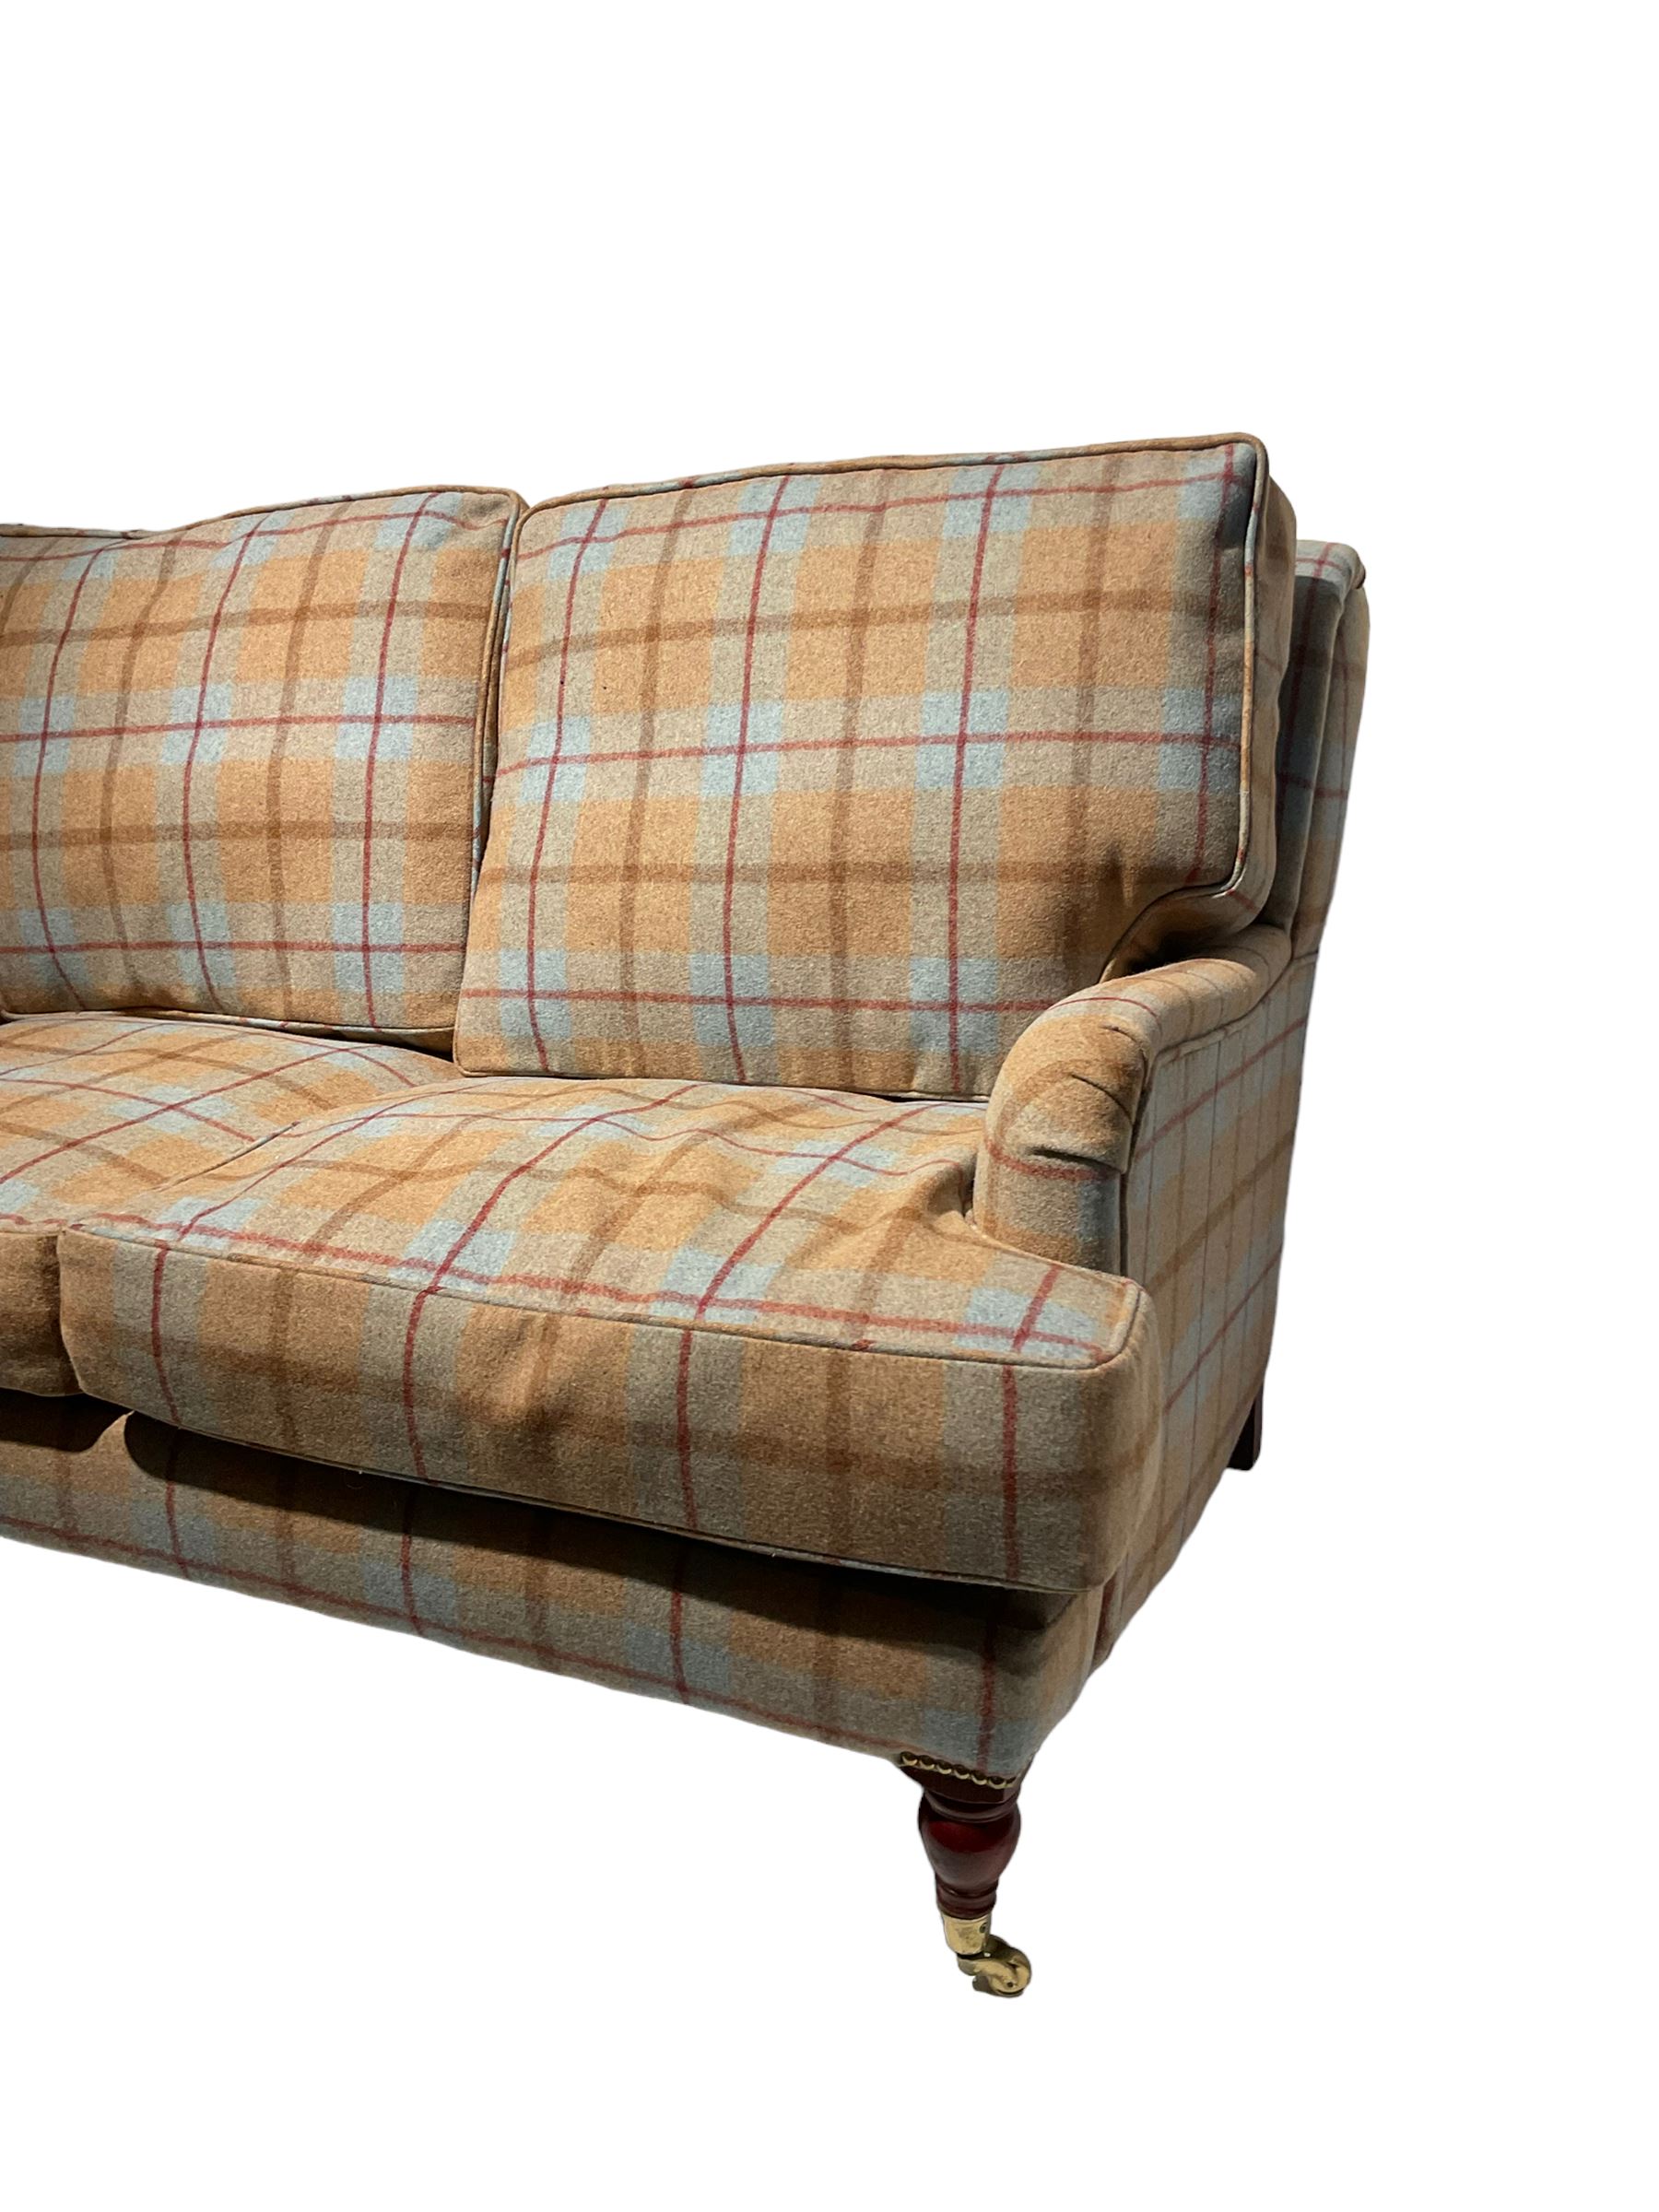 Howard design feather filled tartan pattern two seat sofa on Victorian style turned legs with castor - Image 2 of 5